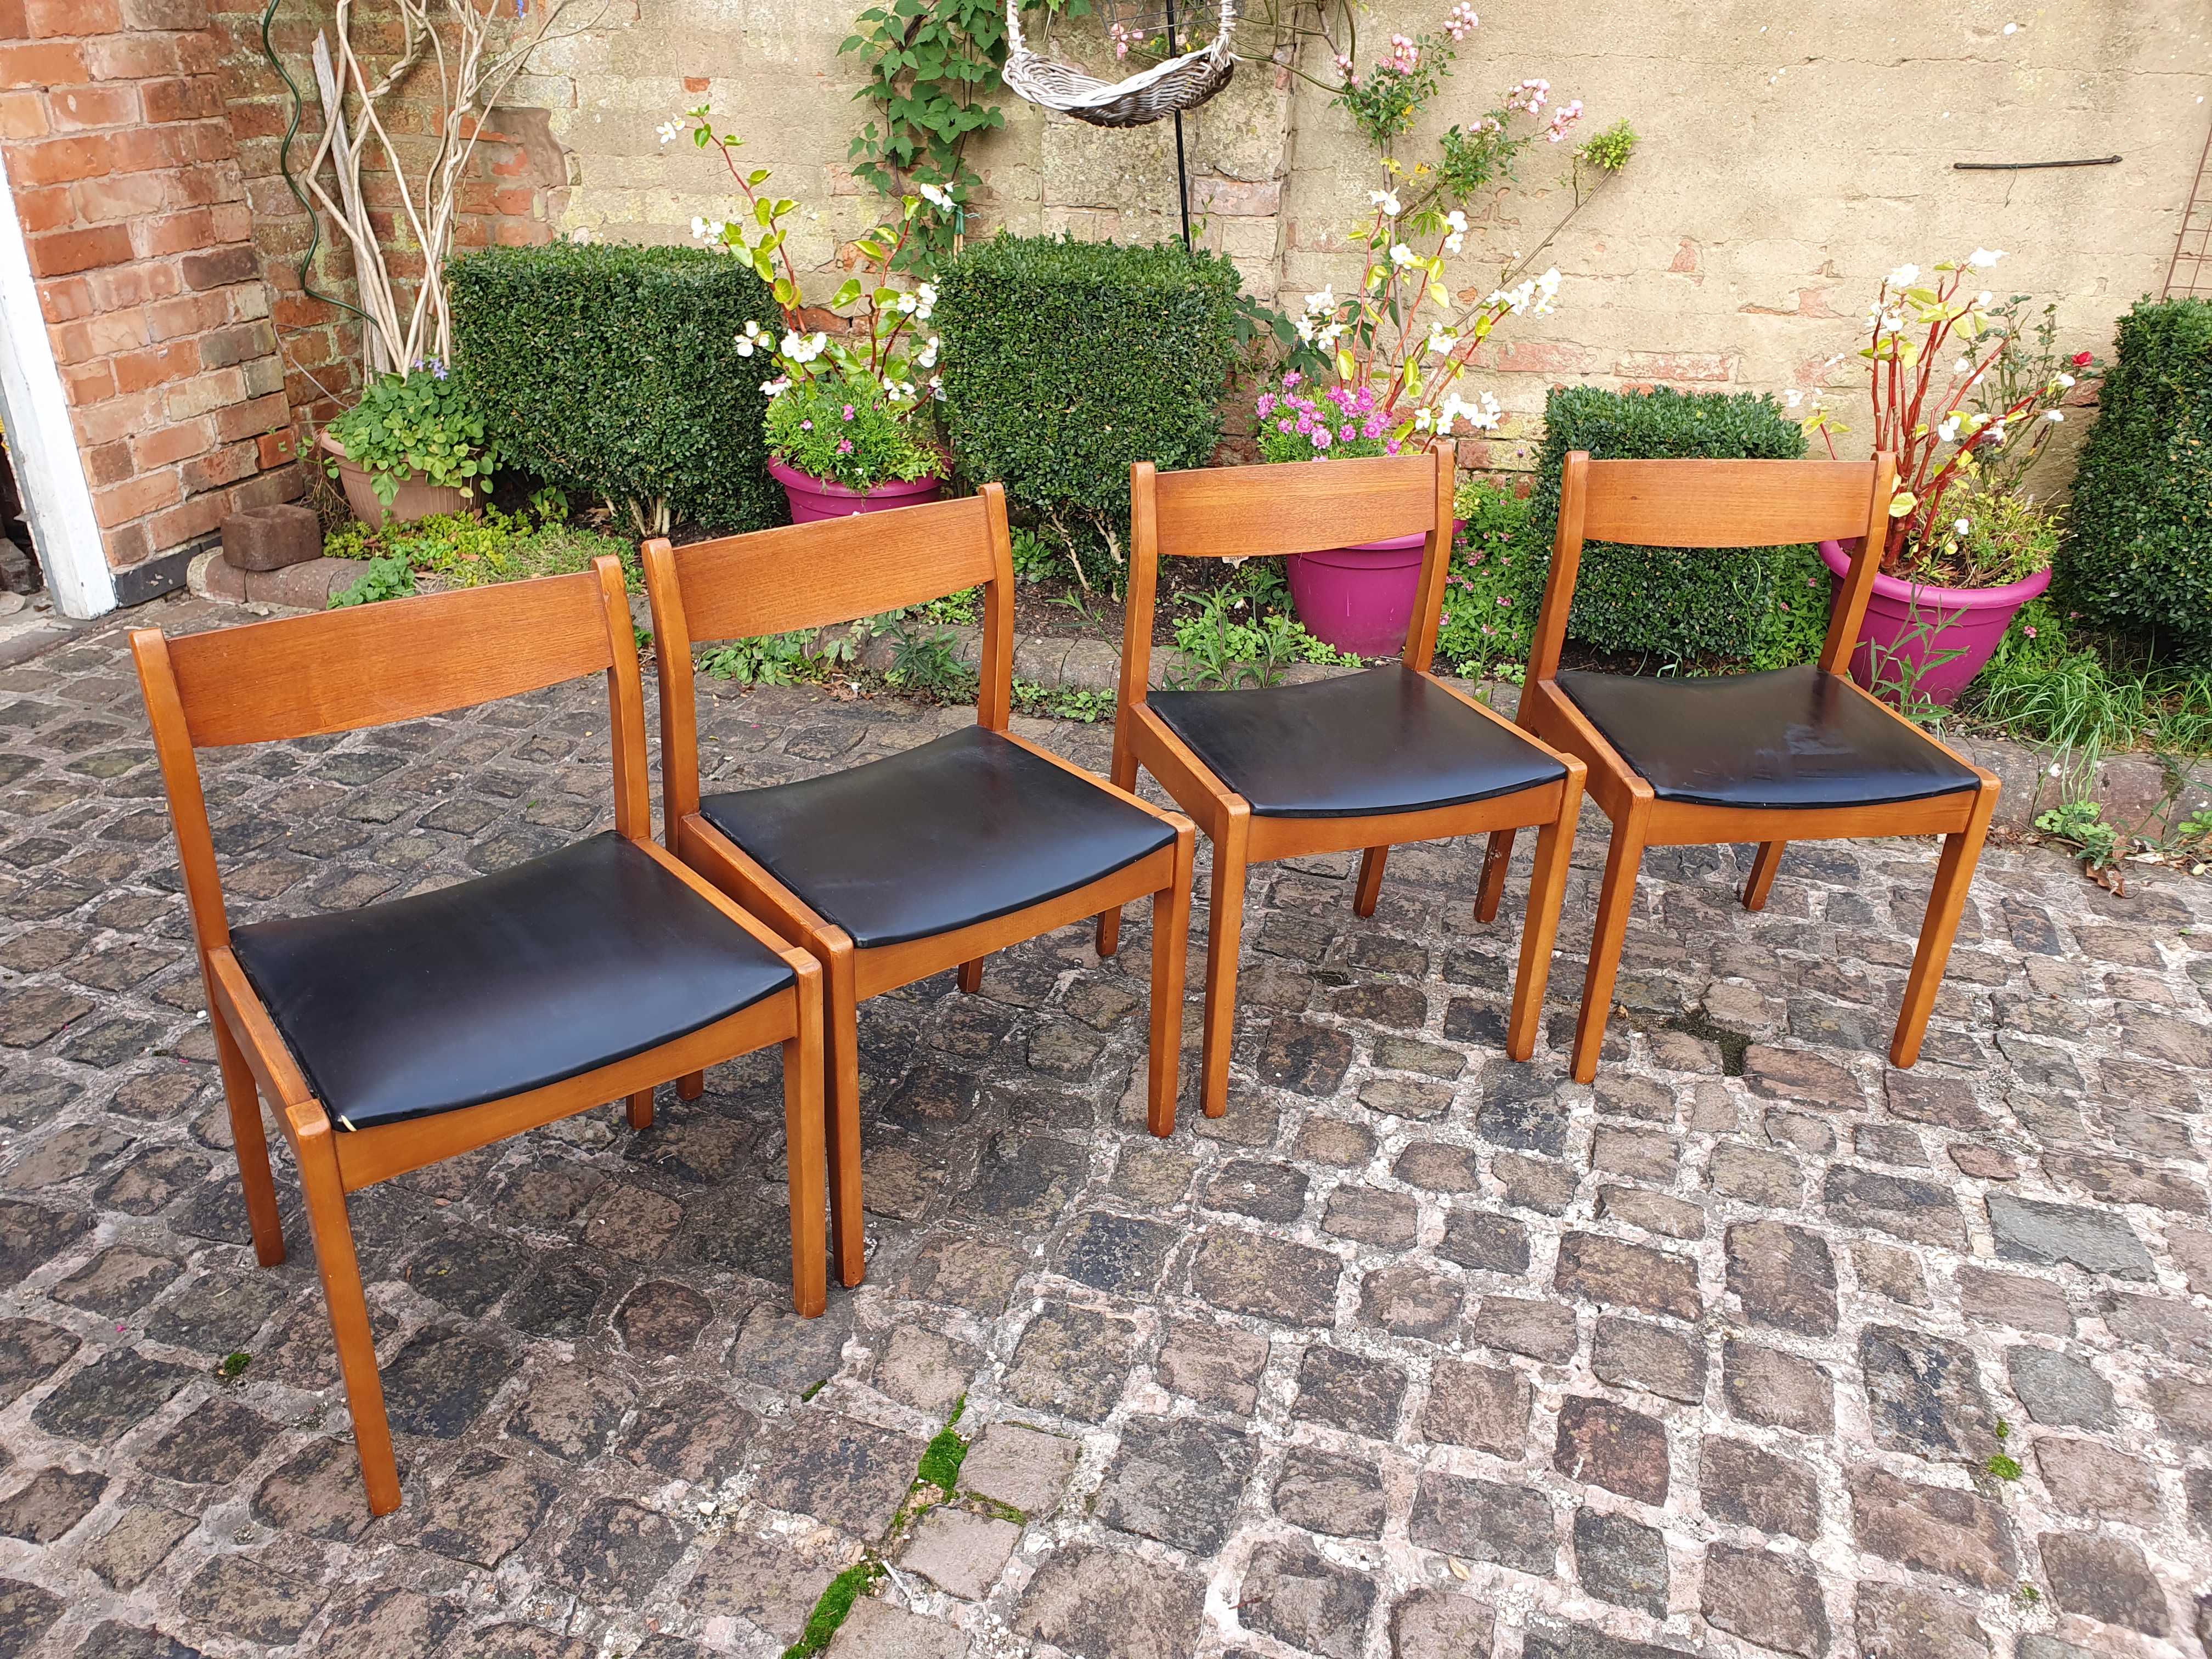 Four 60's teak dining chairs.